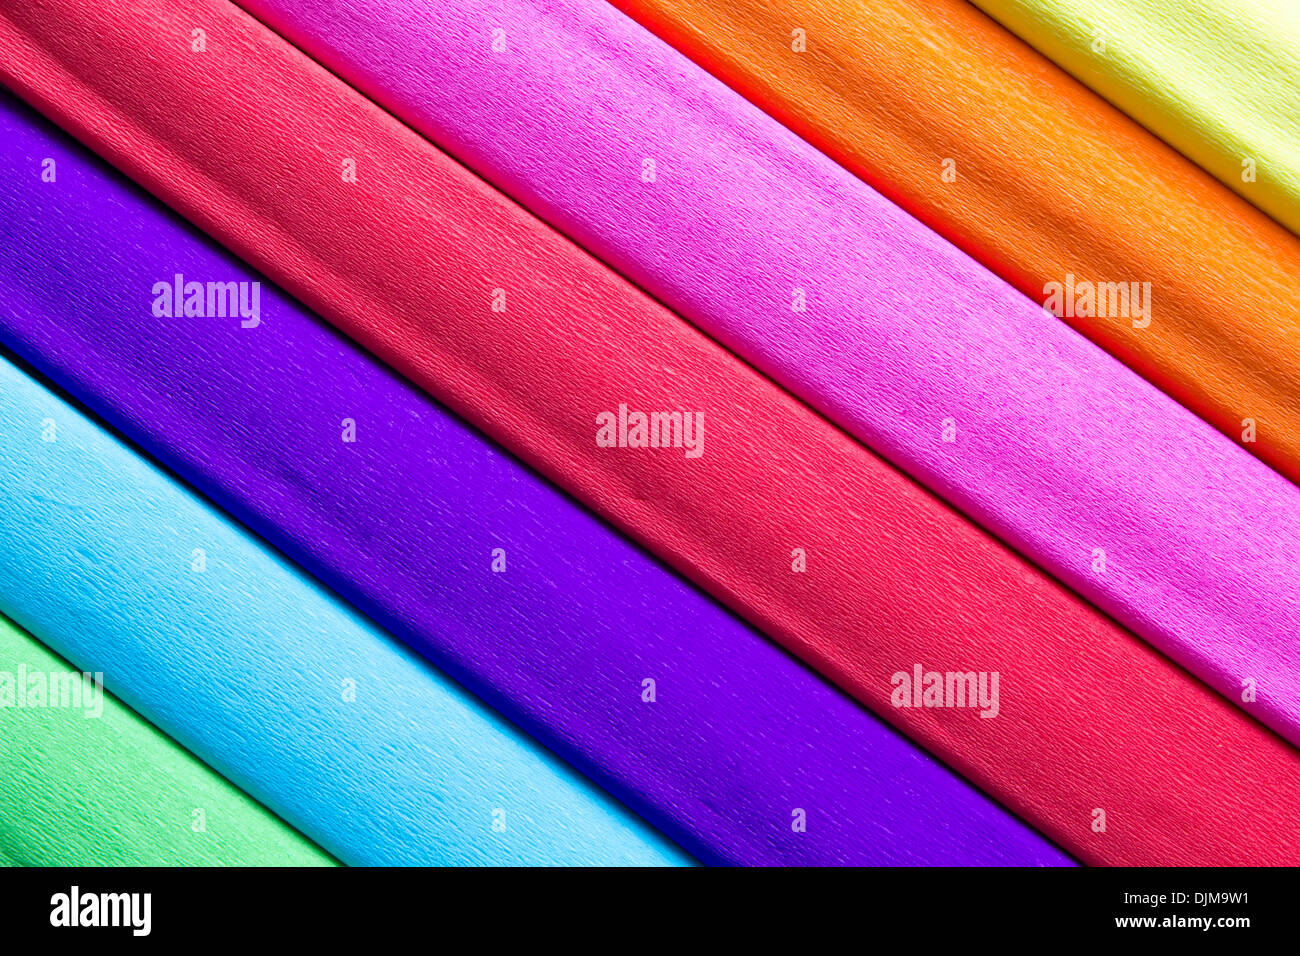 set of colorful tissue paper as background Stock Photo